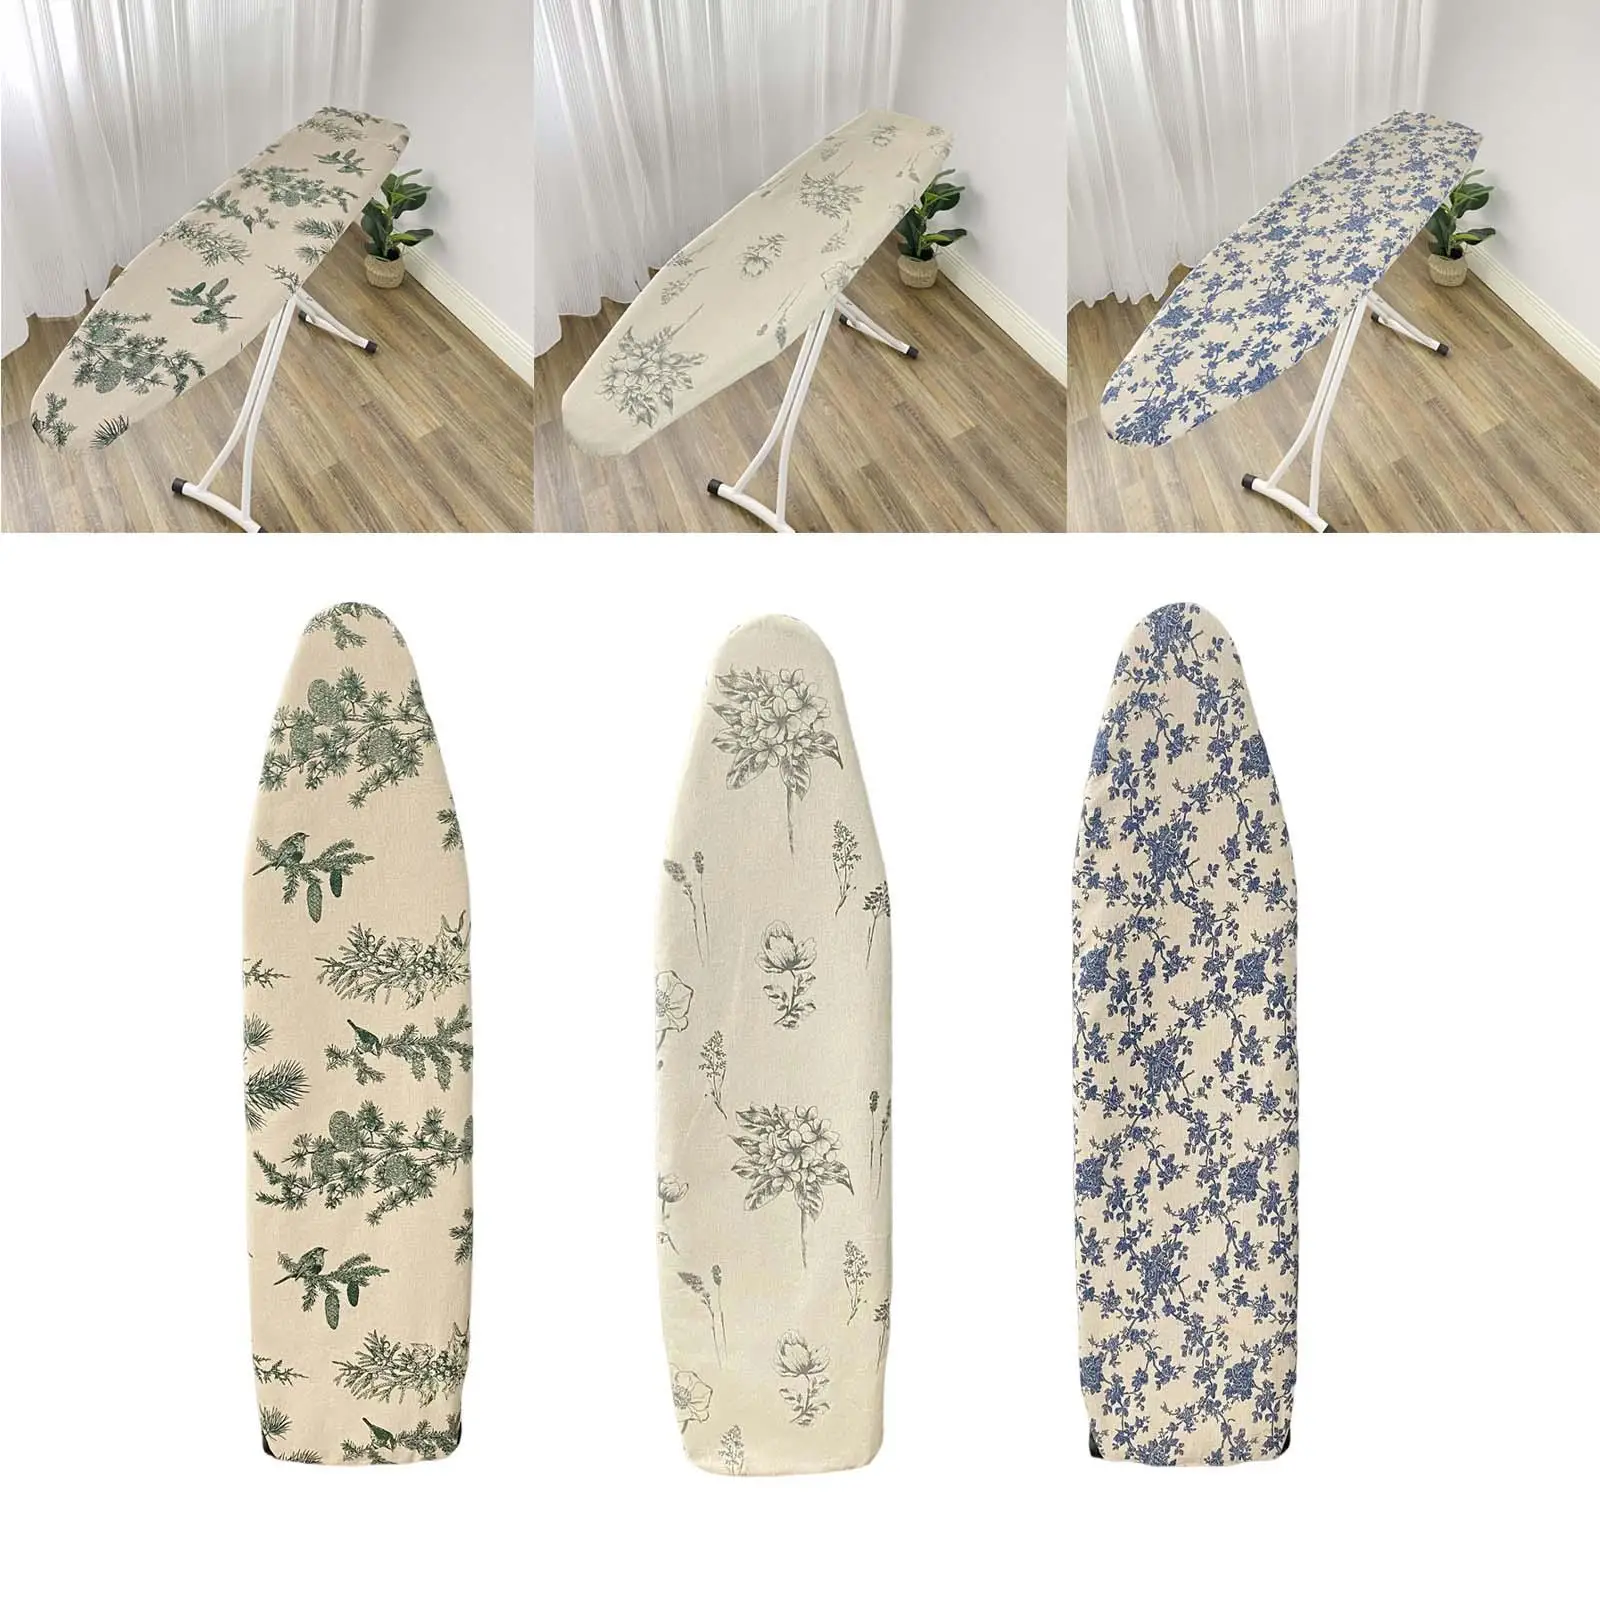 Ironing Table Cover Protector Easy to Install Durable Heat Resistant Washable Reusable Foldable Ironing Board Cover for Travel